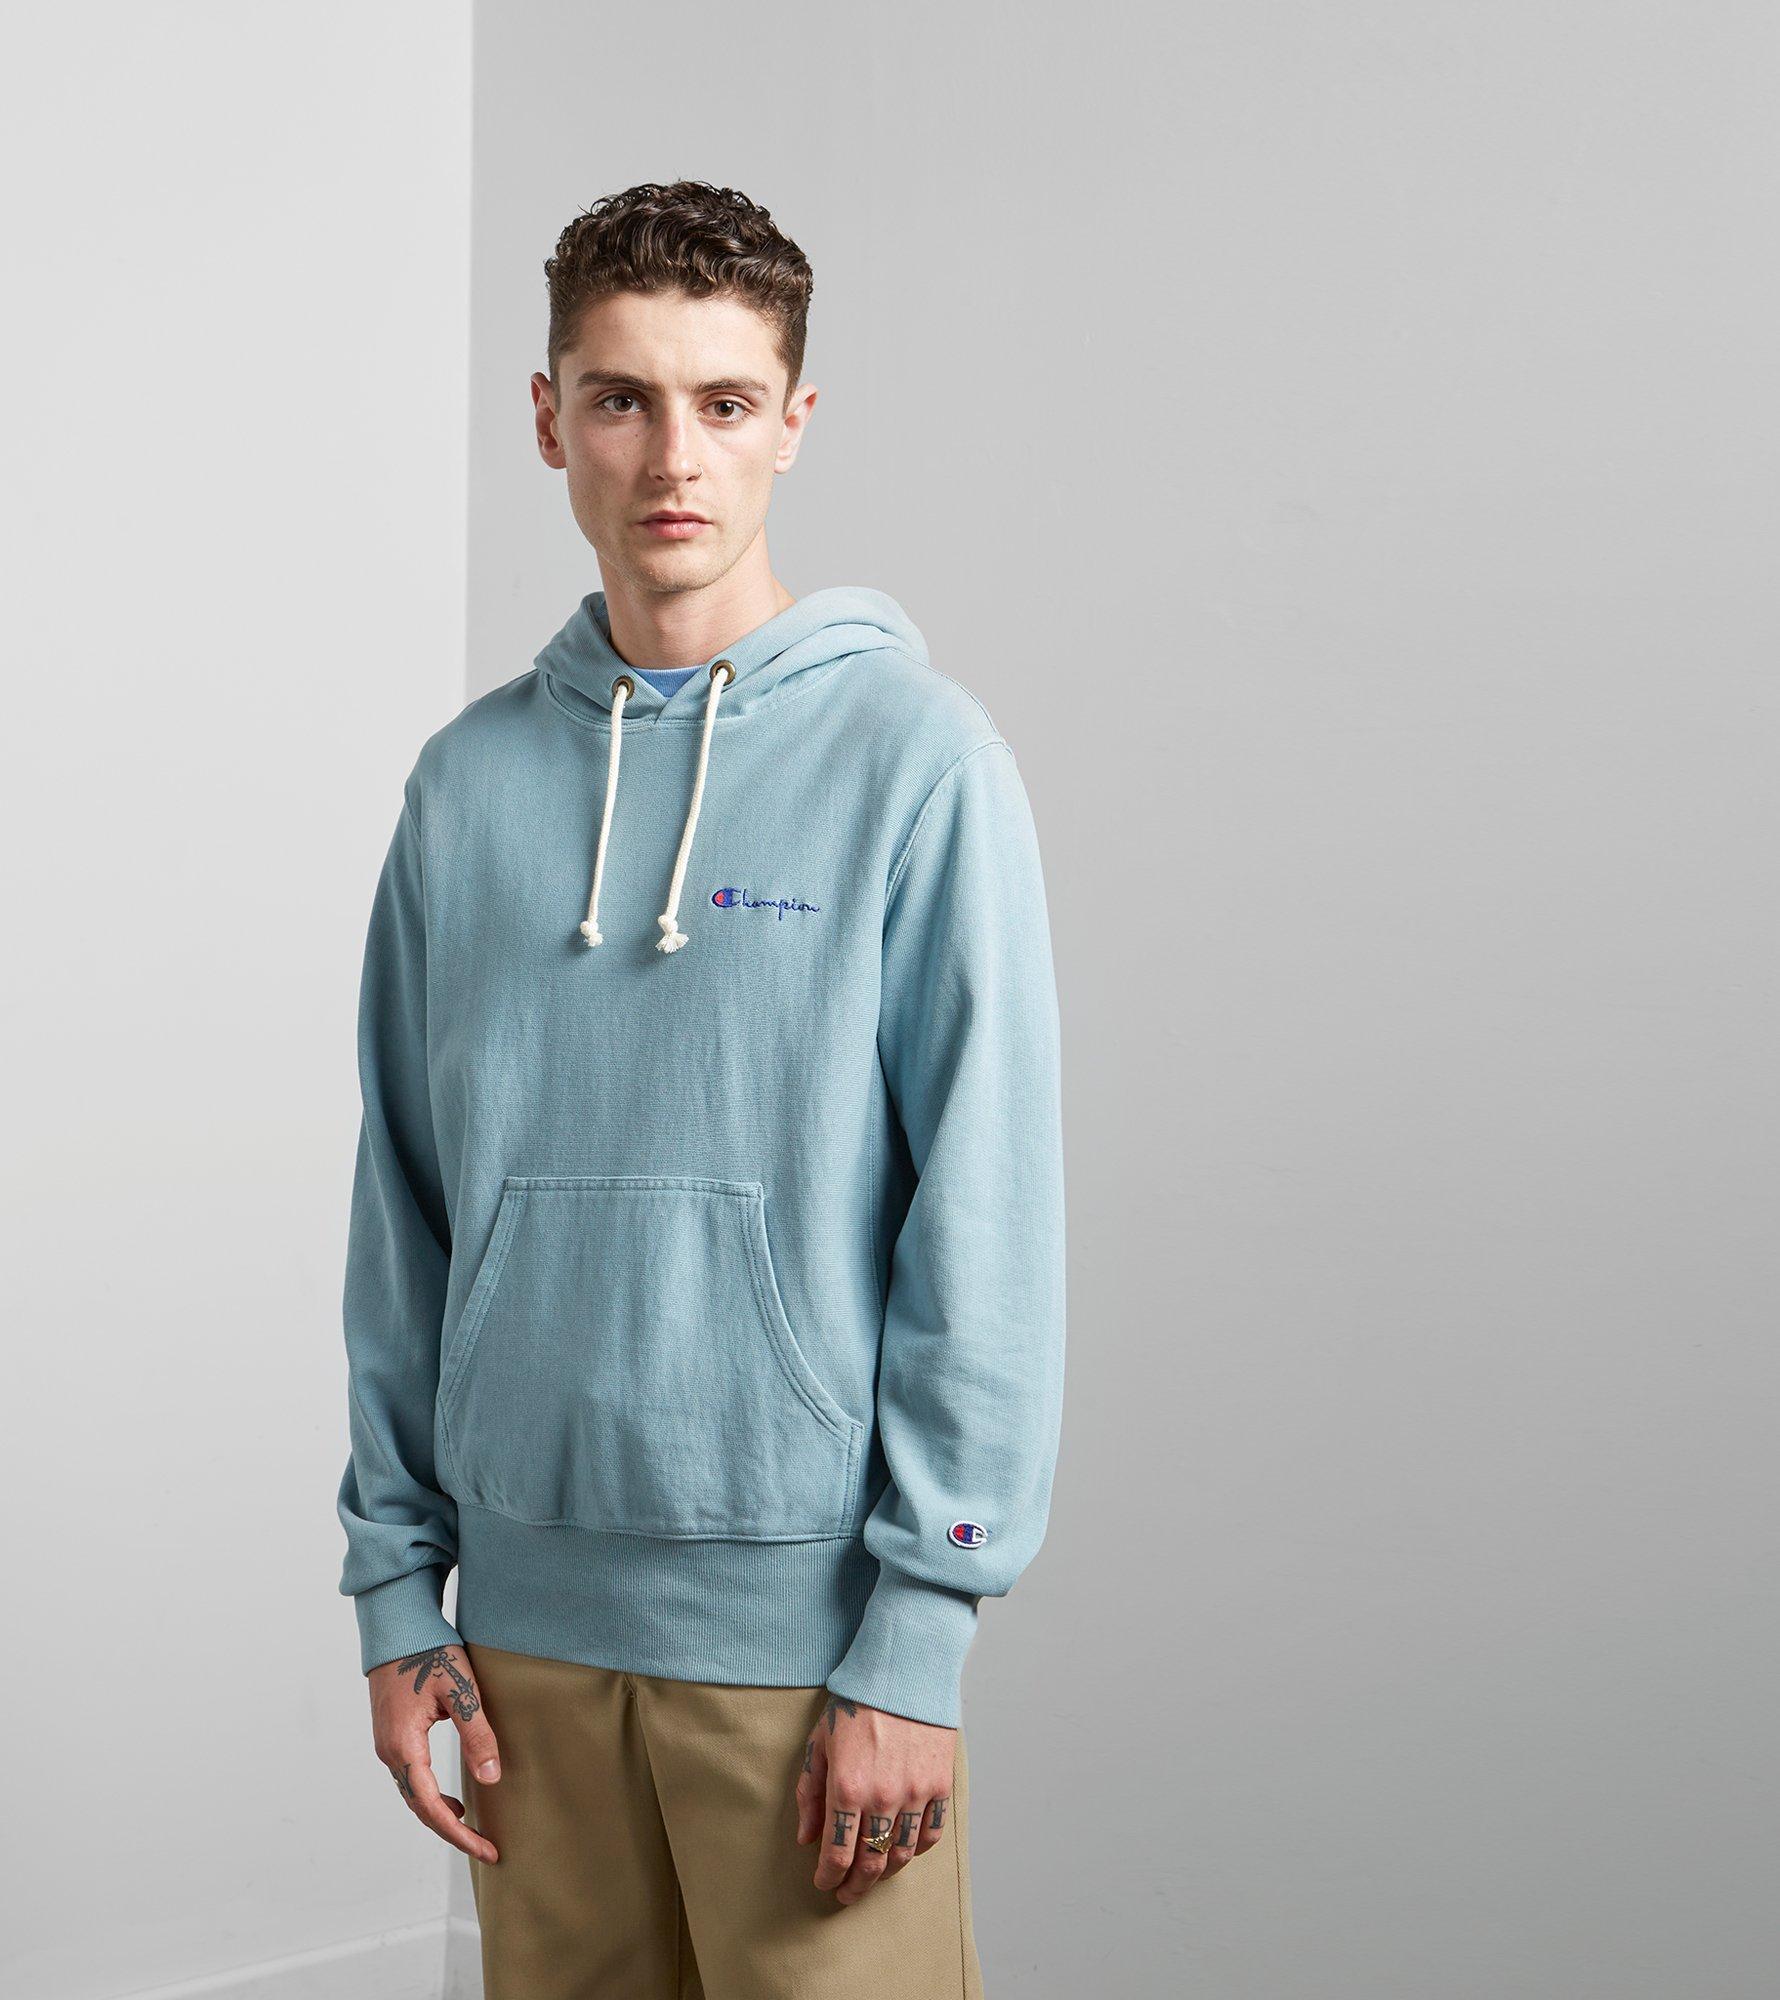 Lyst - Champion Garment Dyed Hoody - Size? Exclusive in Blue for Men